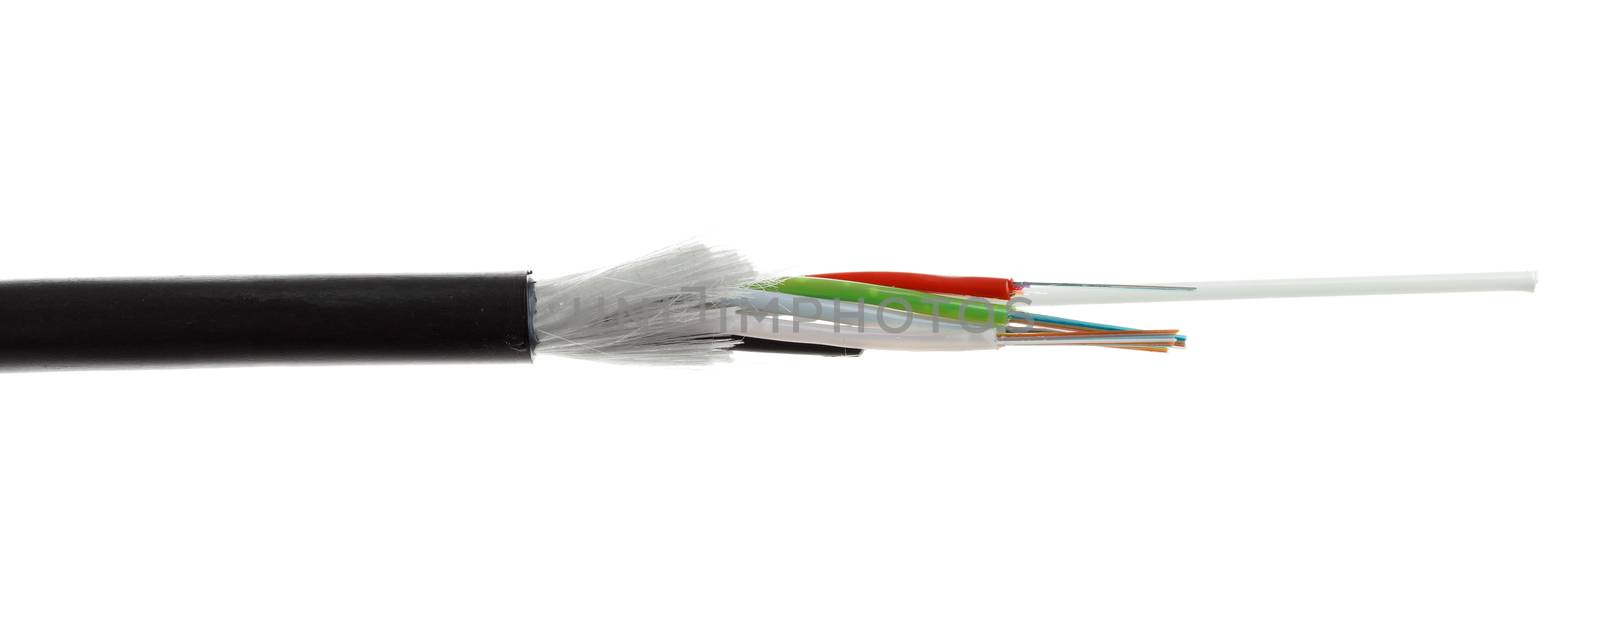 Fiber optic, optical cable detail isolated on white background. Loose tubes with optical fibres and central strenght member including waterblocking glass yarn and ripcord, multimode or single mode